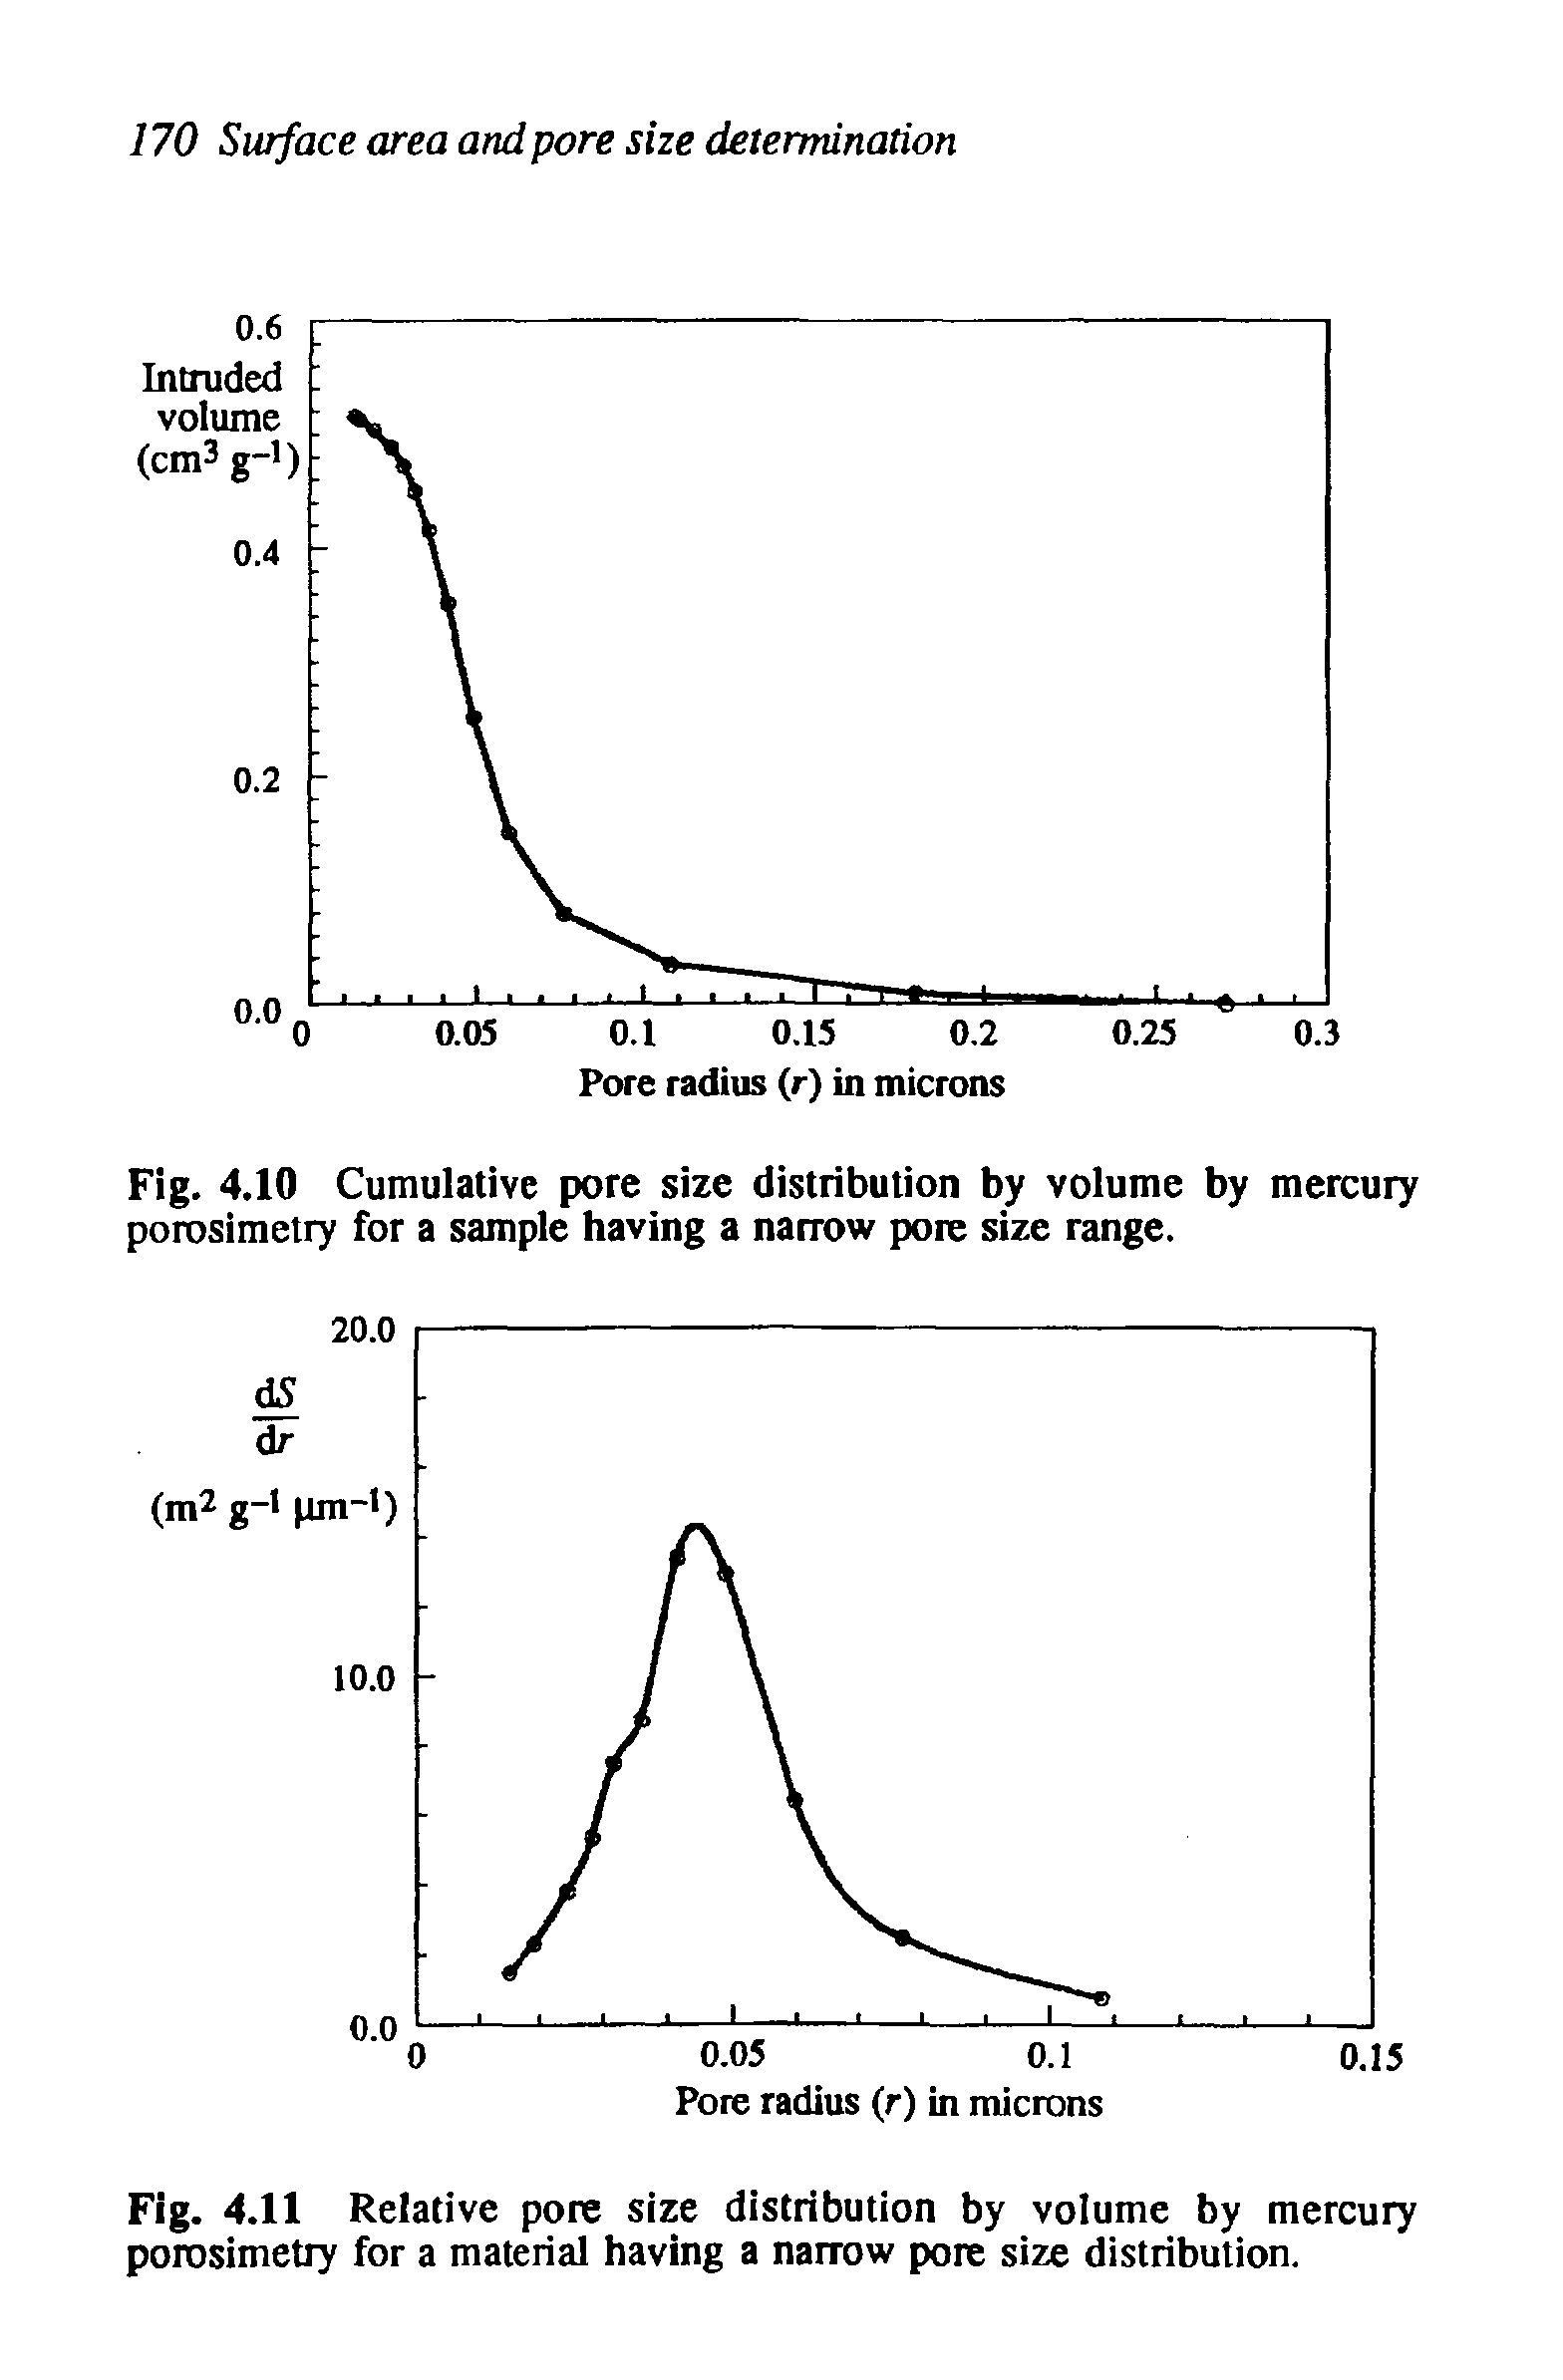 Fig. 4.10 Cumulative pore size distribution by volume by mercury porosimetry for a sample having a narrow pore size range.